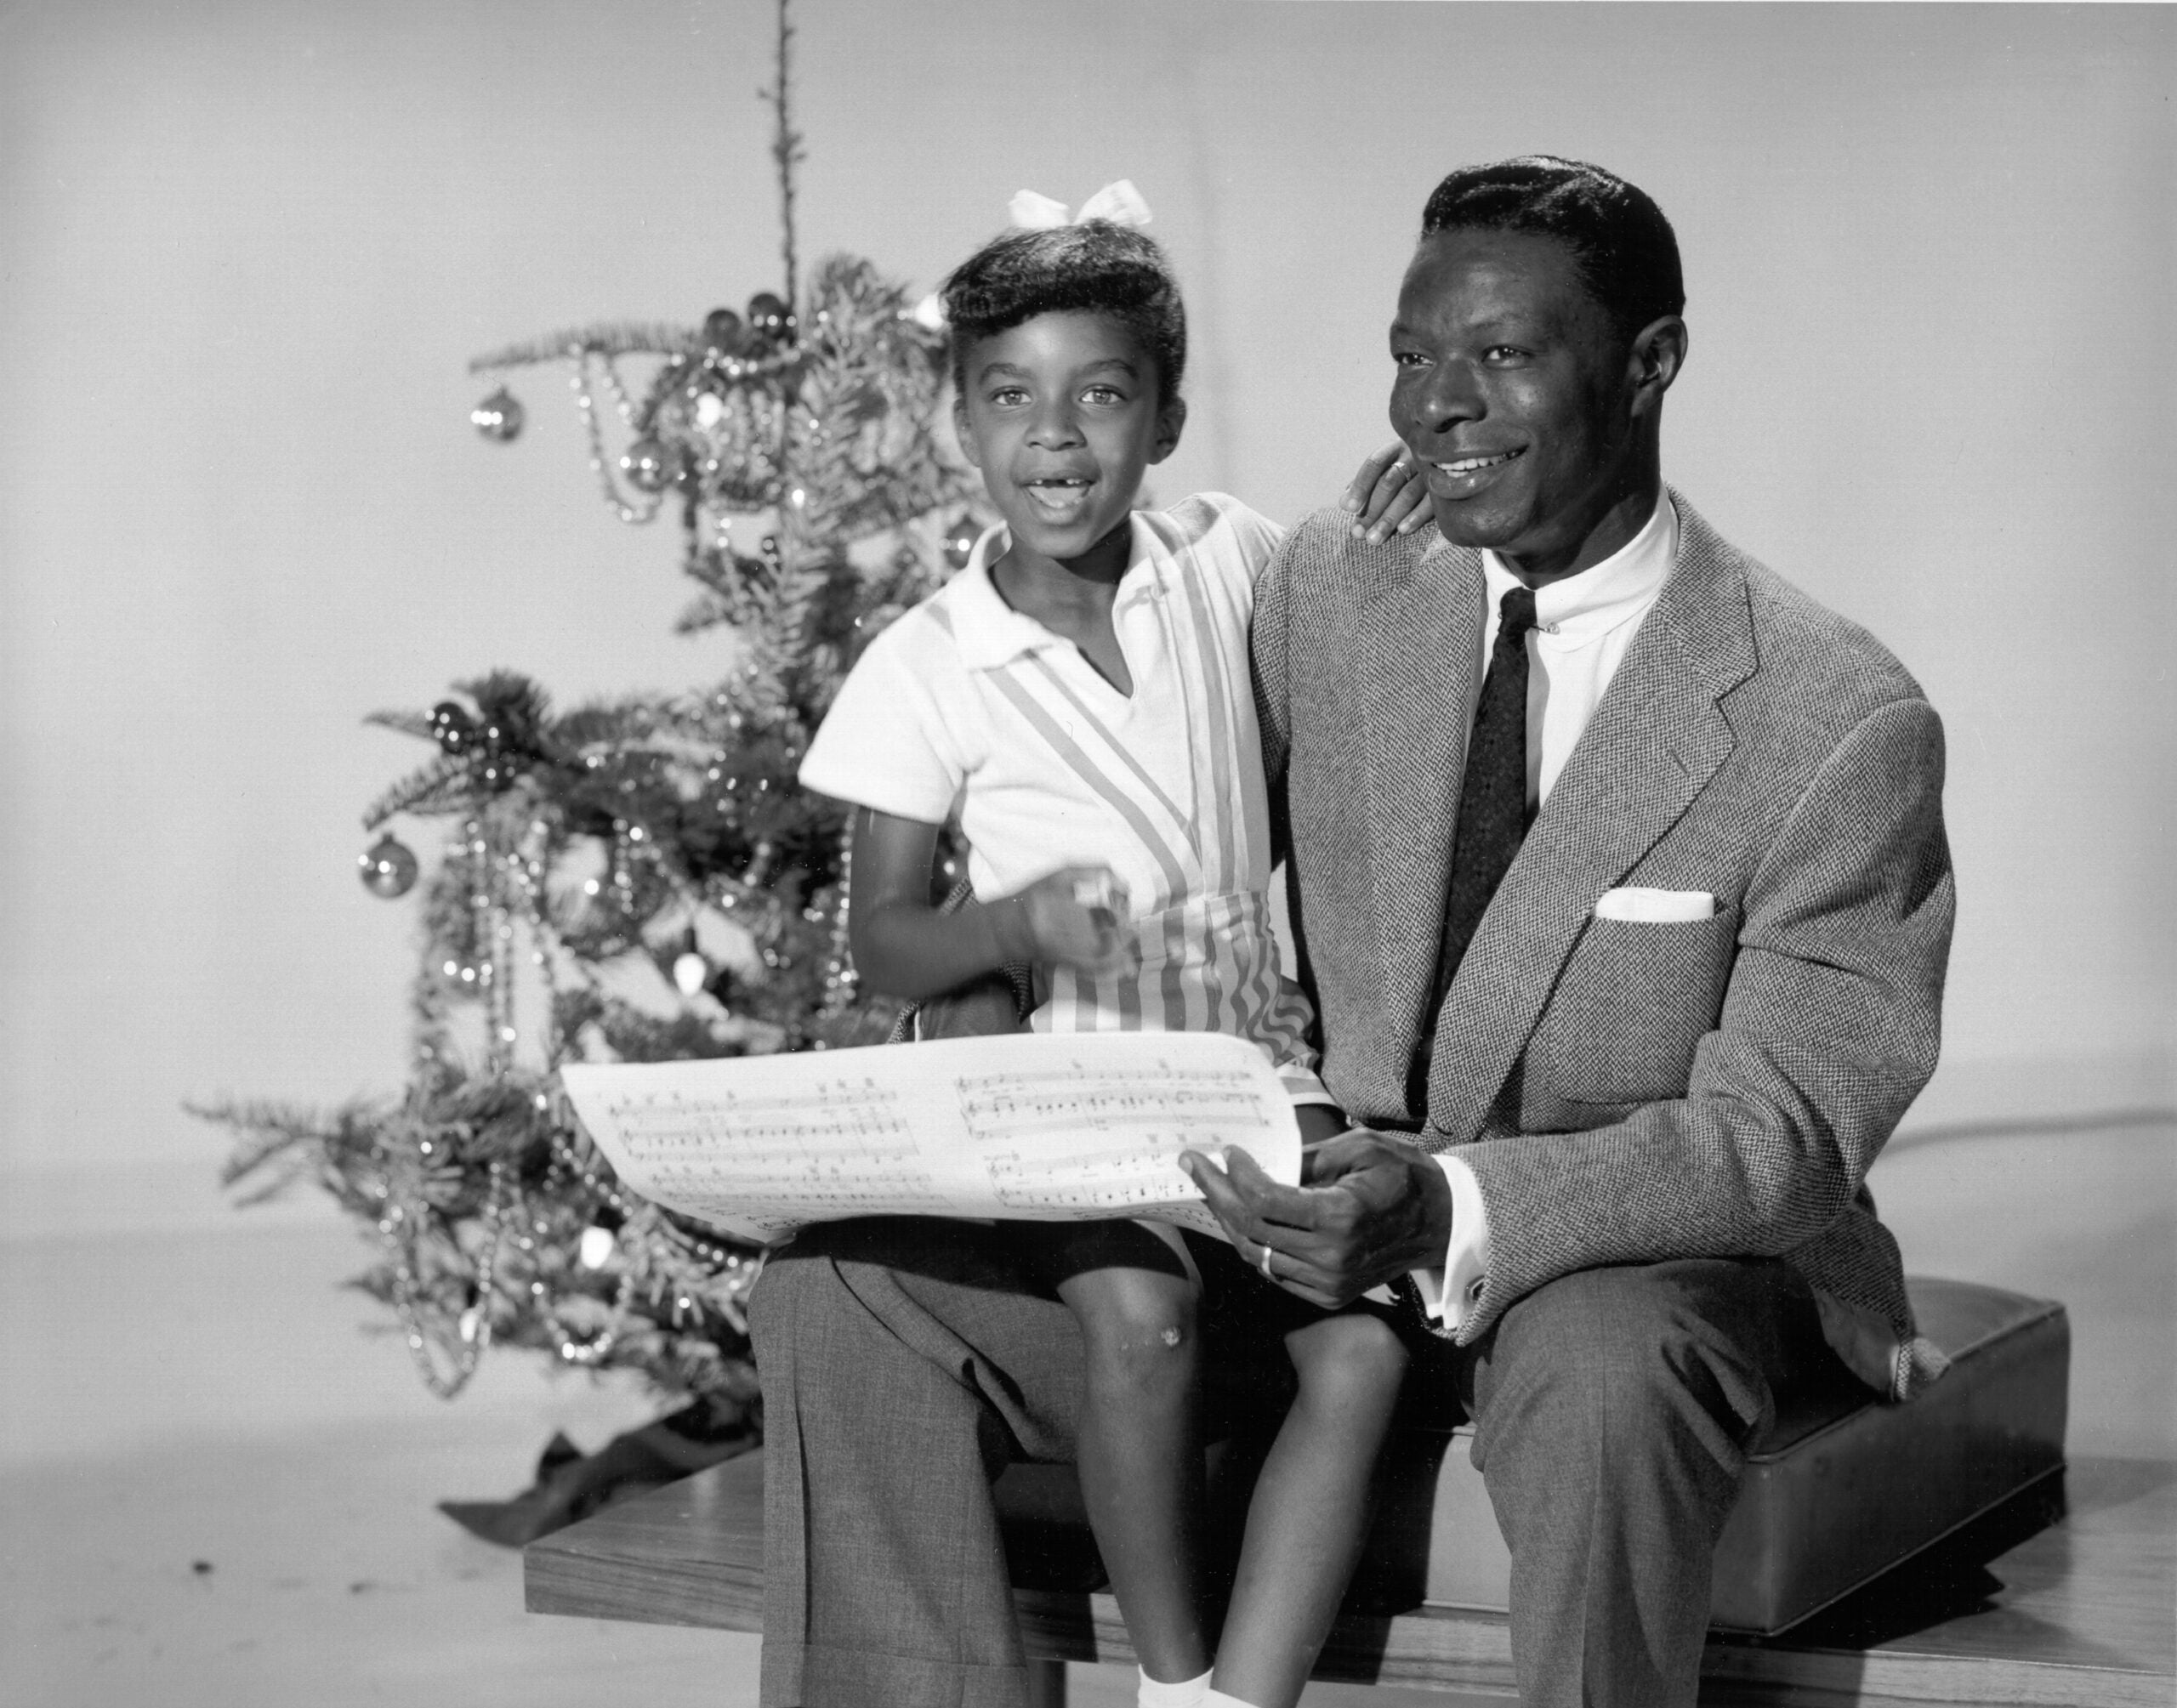 Nat King Cole and his daughter Natalie Cole in front of a Christmas tree singing Christmas songs. Black and white photo.